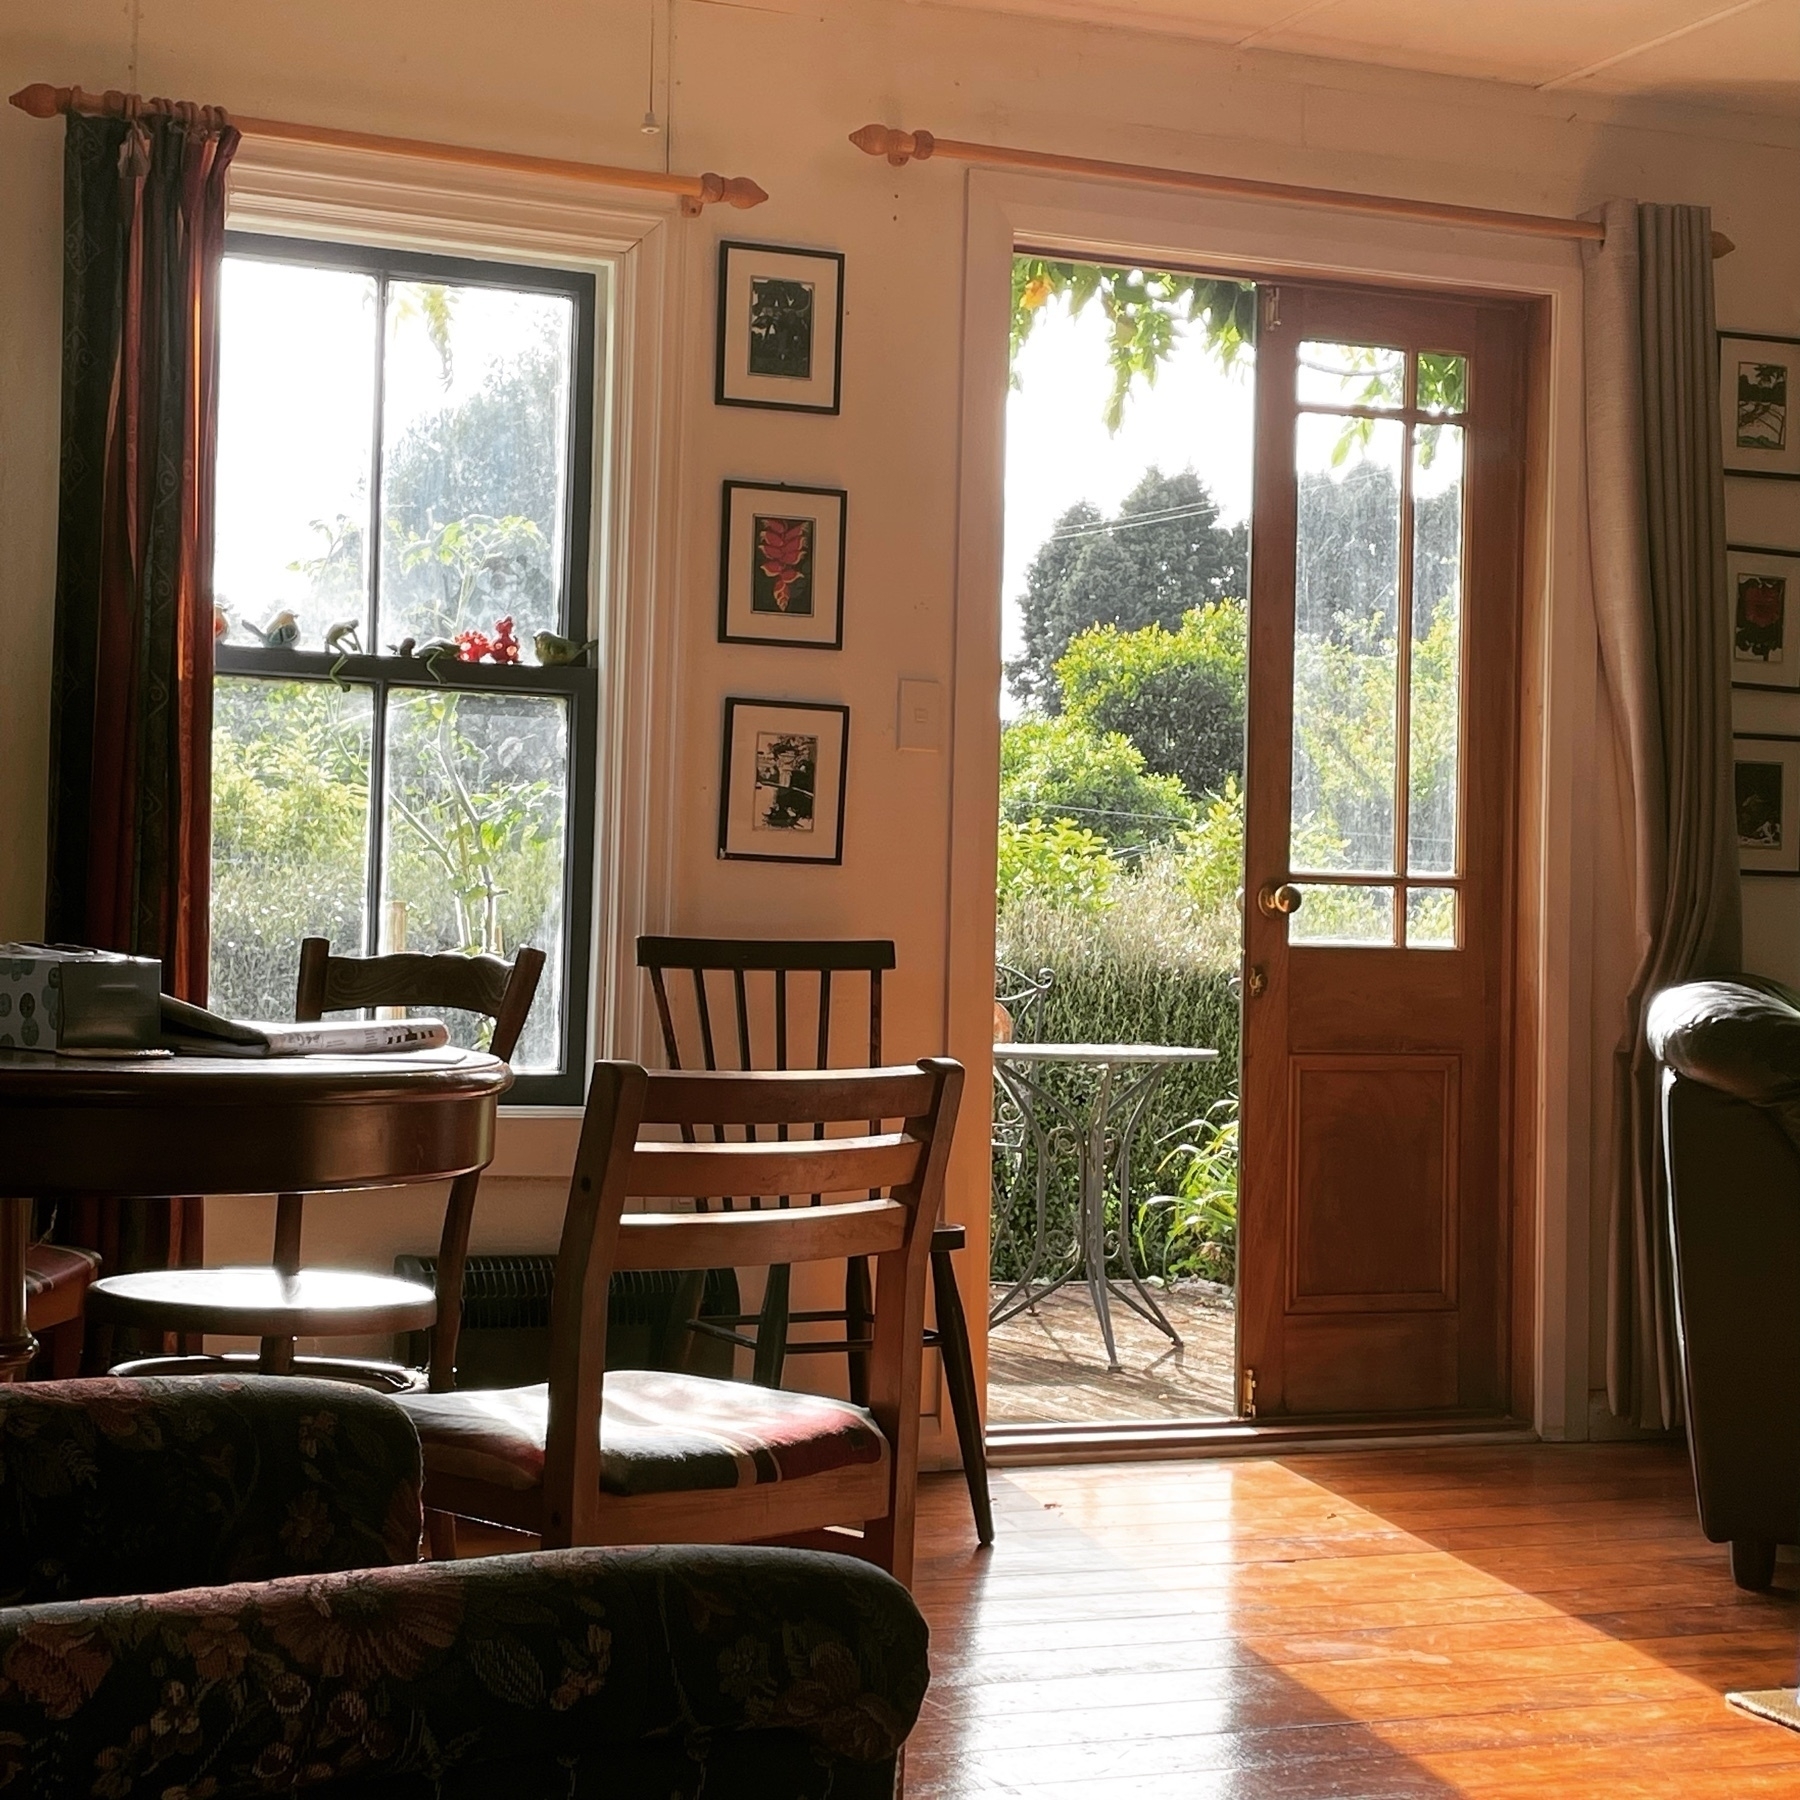 Morning light streams through an open French door and window in a wooden country cottage onto chairs and a table. A garden is visible outside. 